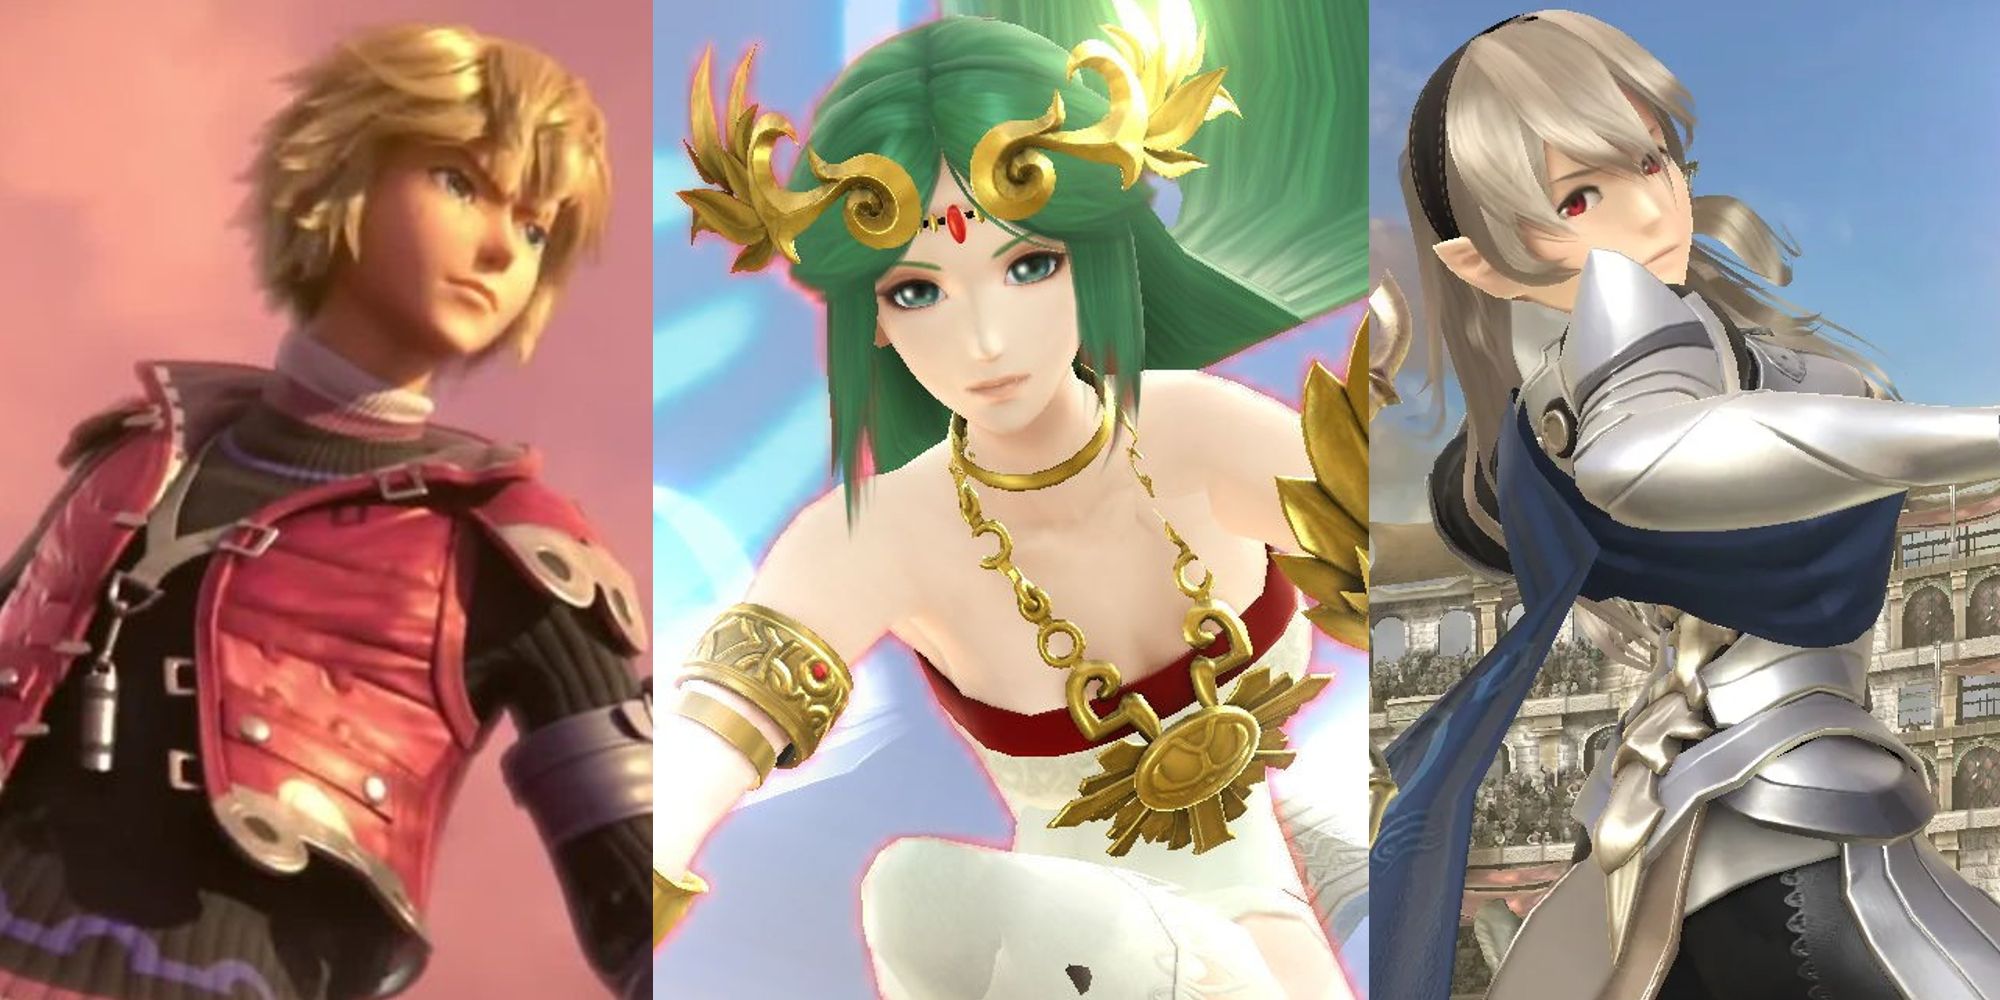 Shulk in a Smash Bros cinematic; Red Team Palutena crouching; Female Corrin posing from behind